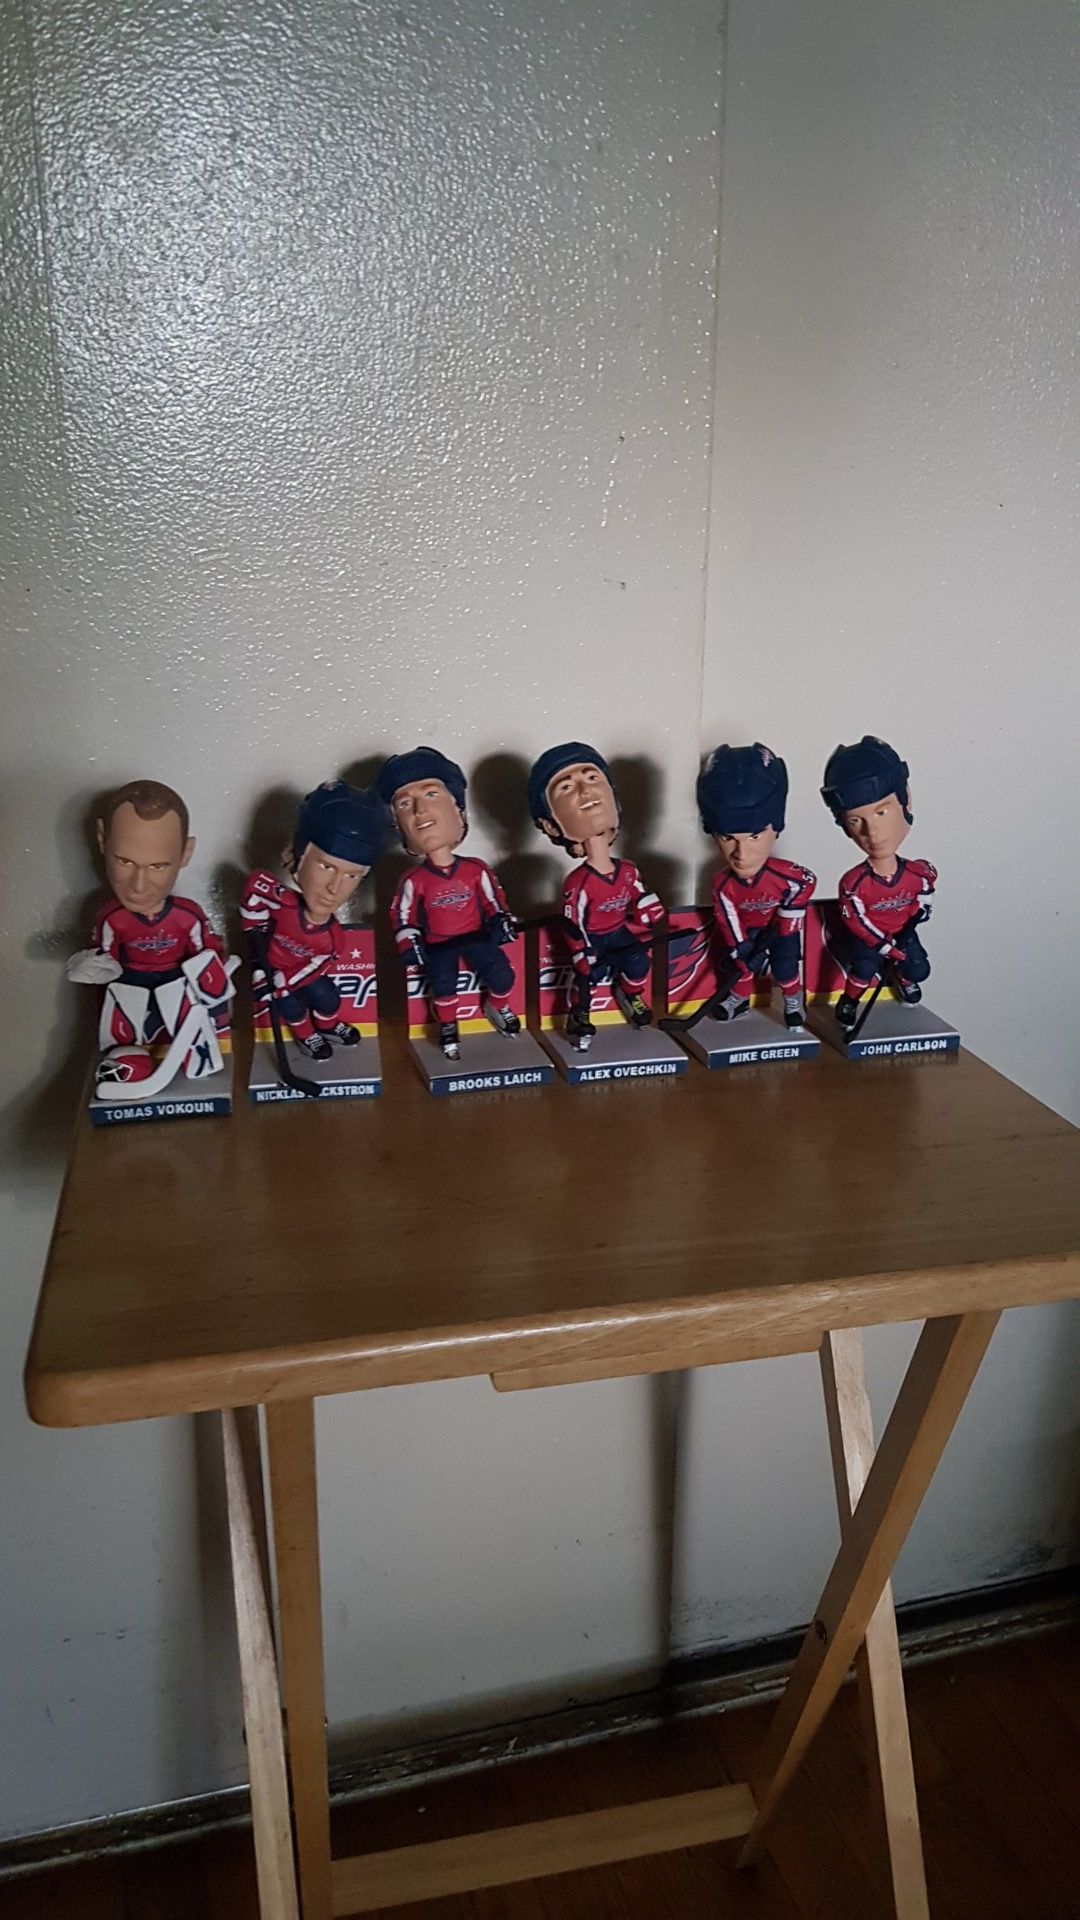 collection of hockey figures